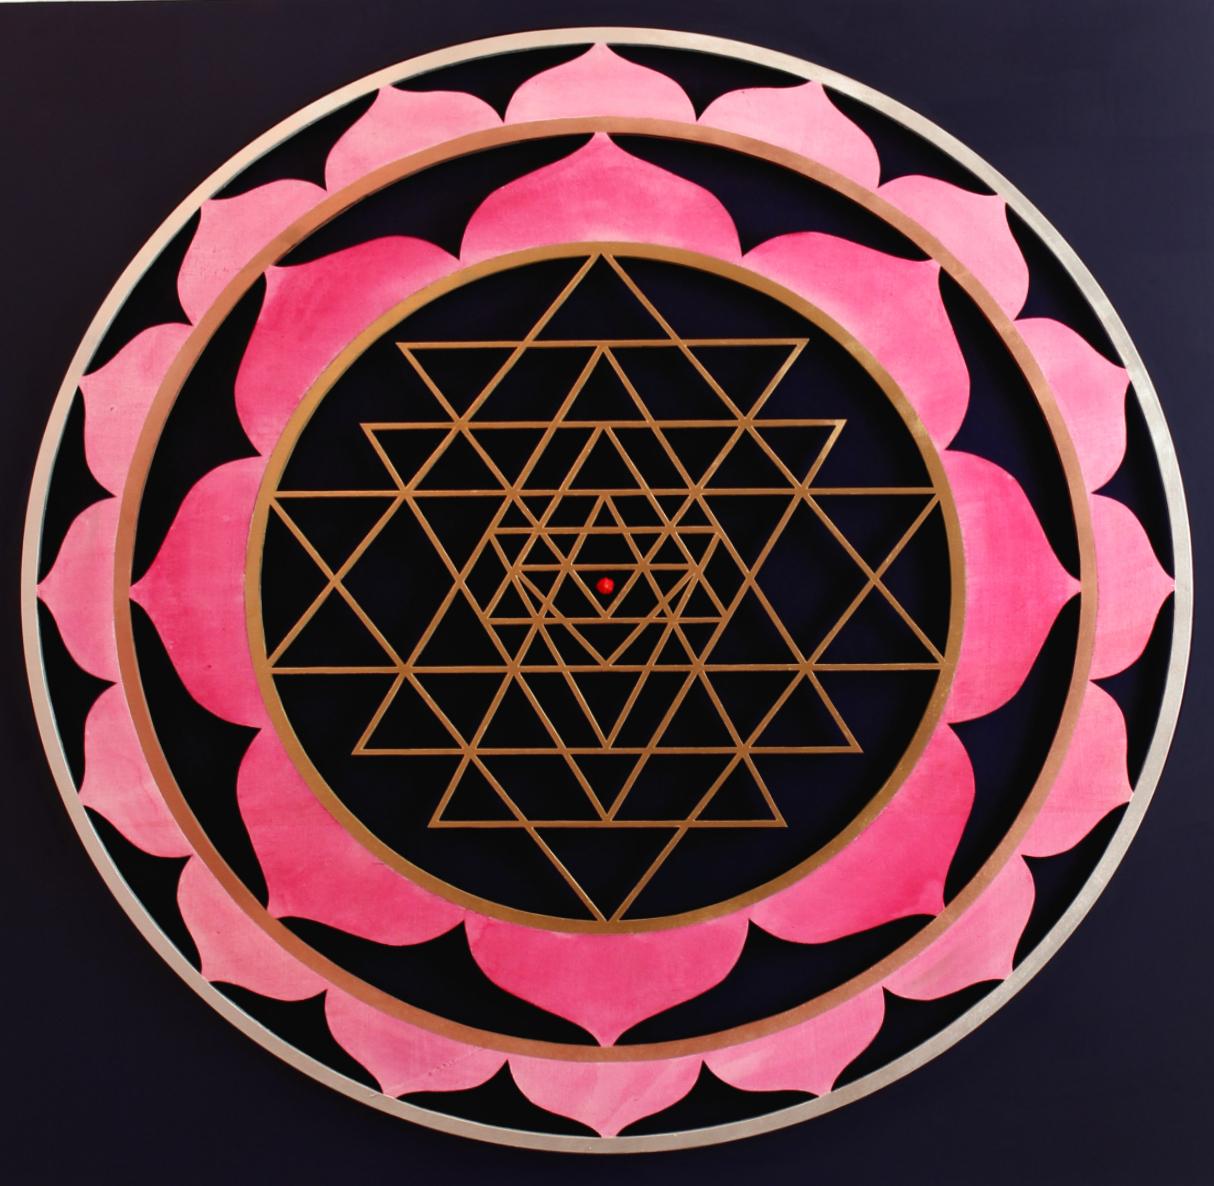 Three-dimensional wood work, with acrylic paint by Udo Haderlein, 2015. Ready to hang. This is a very fine example of his work with sacred geometry. It comes directly from the studio of the artist. Dimensions are: 66.54 x 66.54 in ( 169 x 169 cm